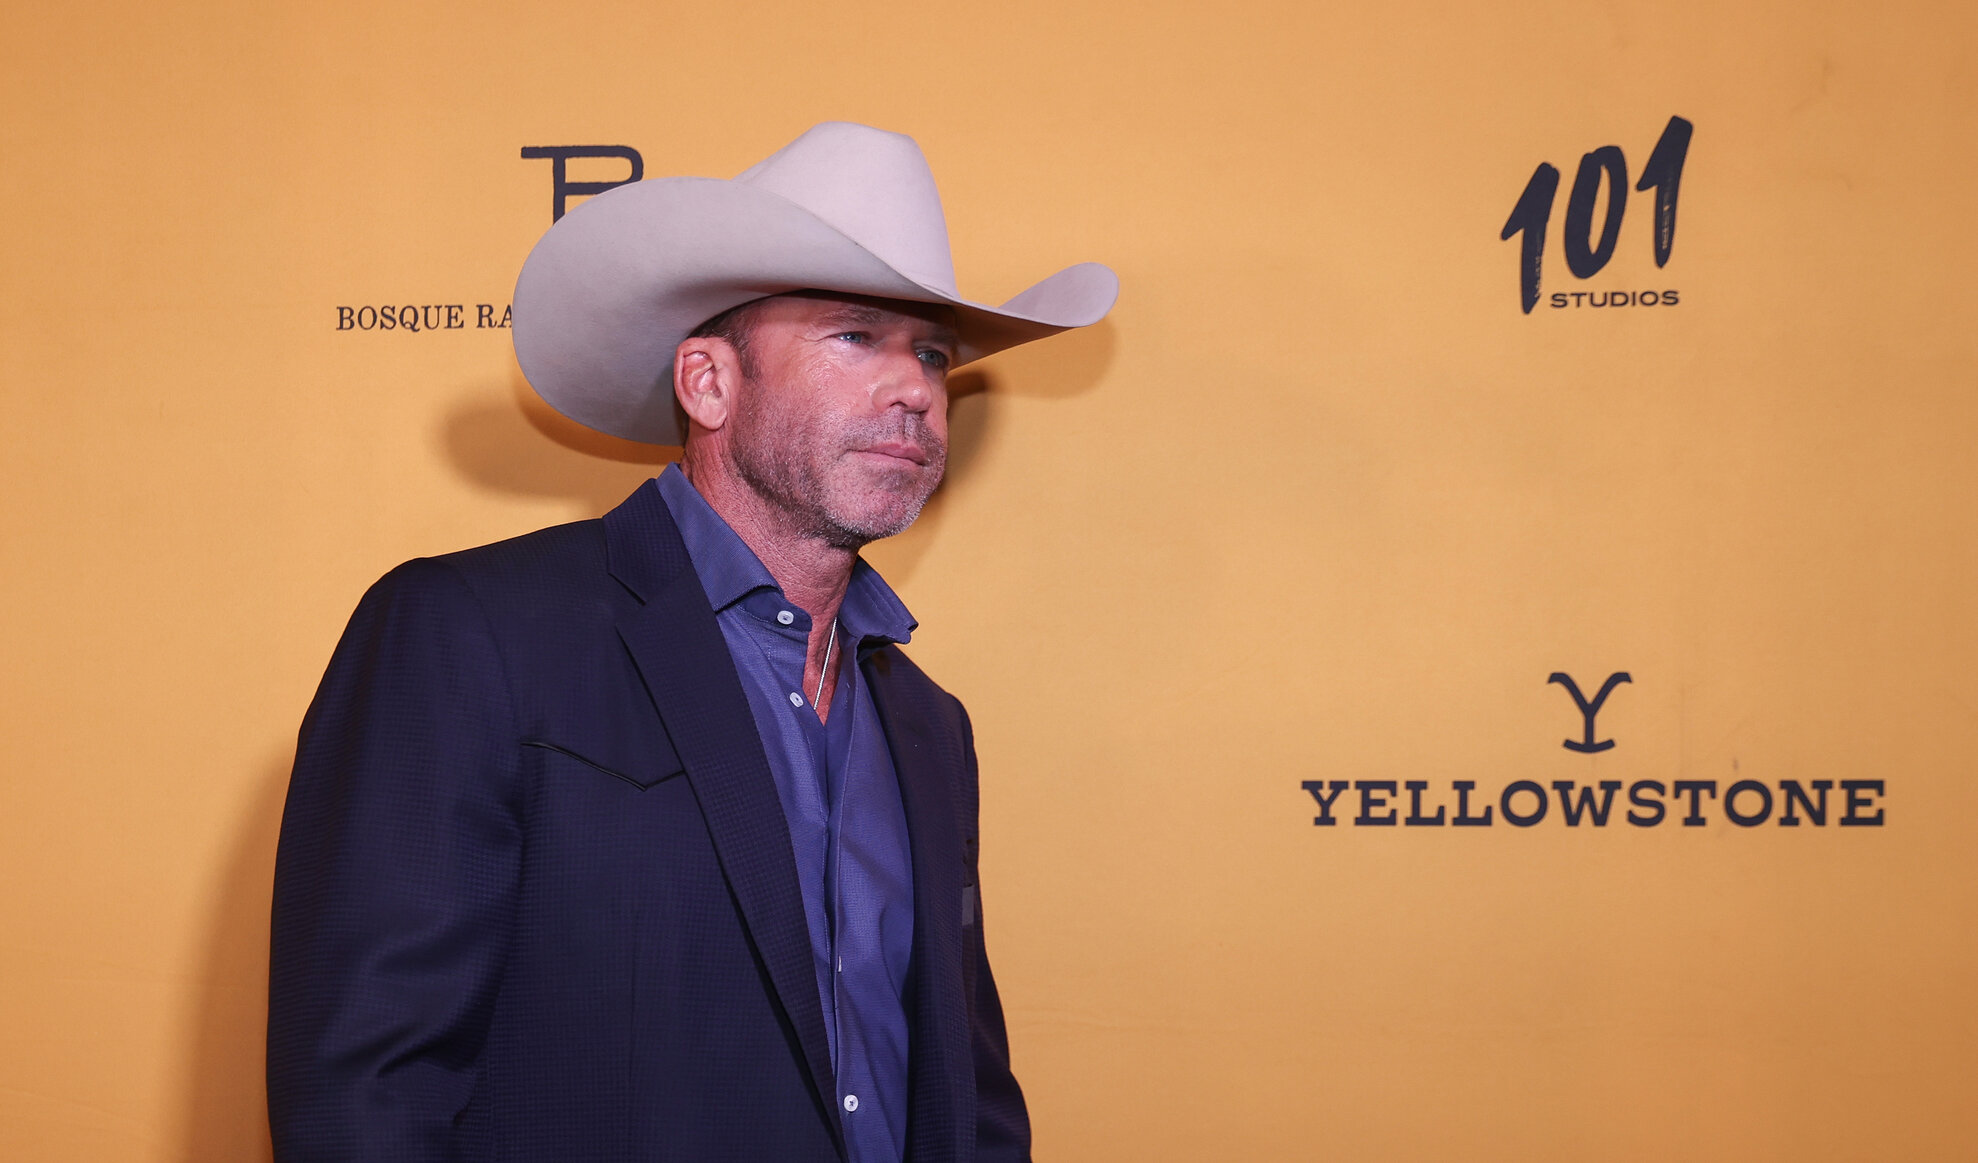 Here’s a ranking of Taylor Sheridan’s most recent shows: Yellowstone. 1883. Tulsa King. Mayor of Kingstown.